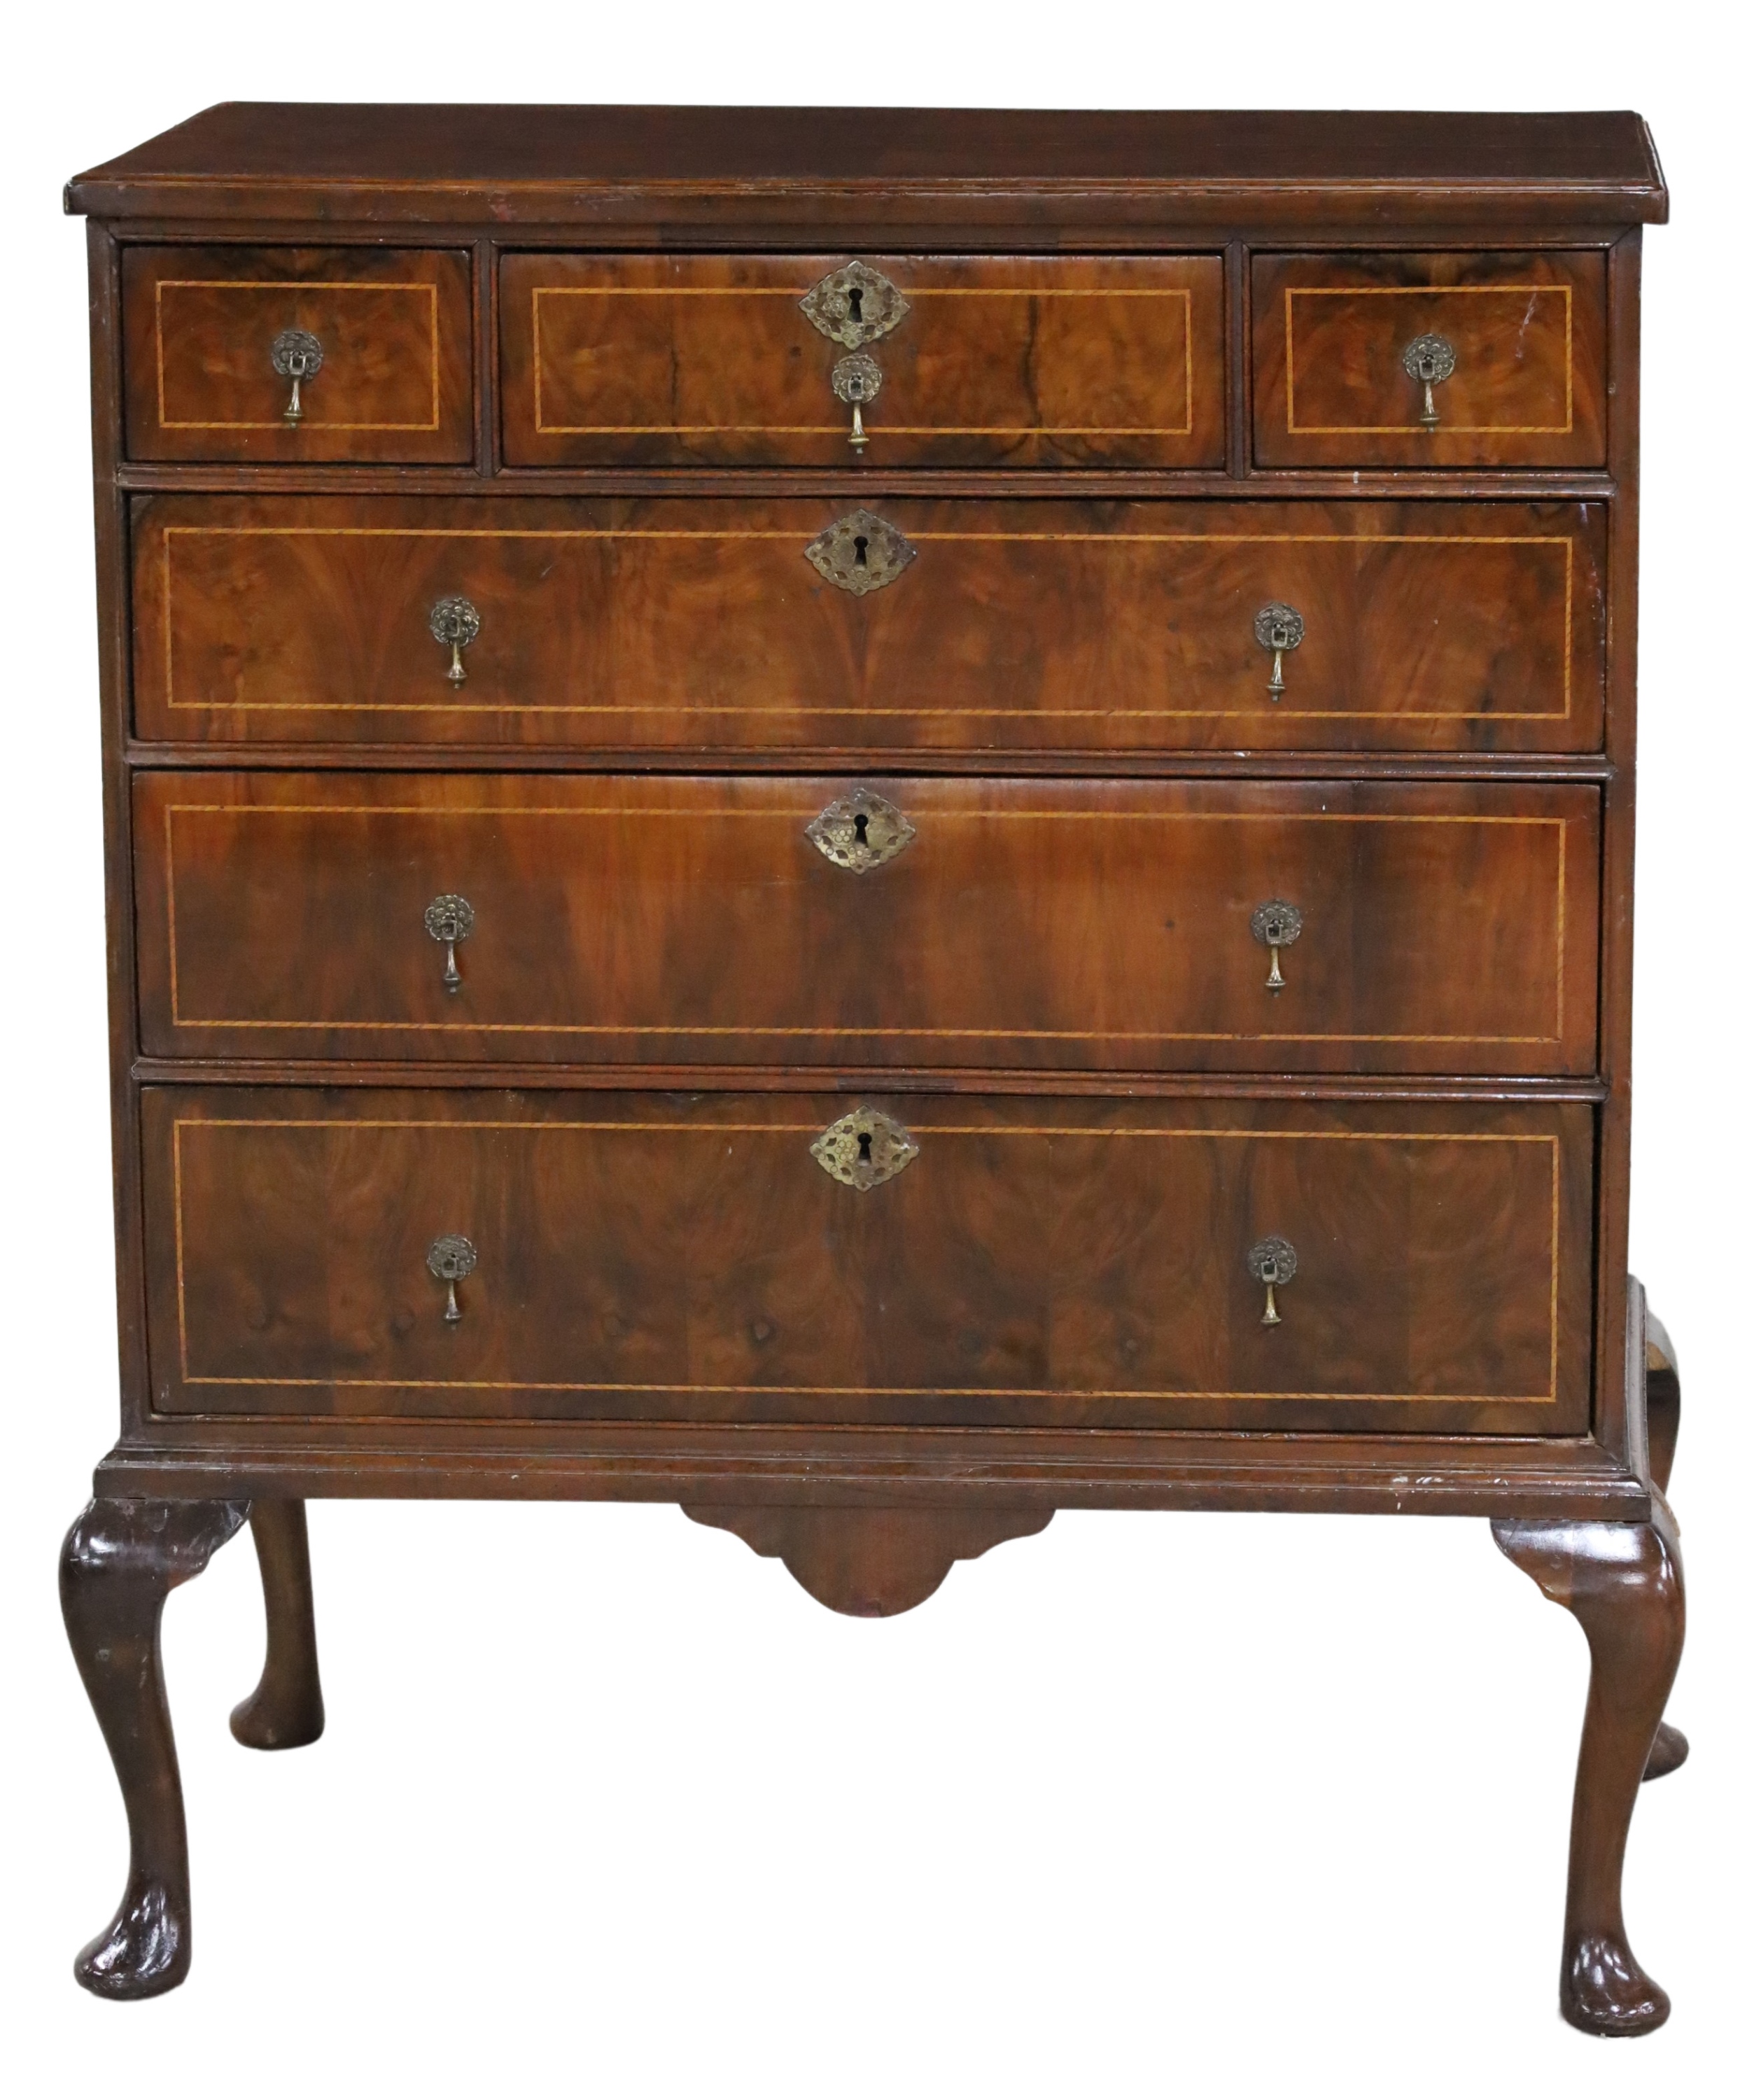 QUEEN ANNE STYLE CHEST ON STAND